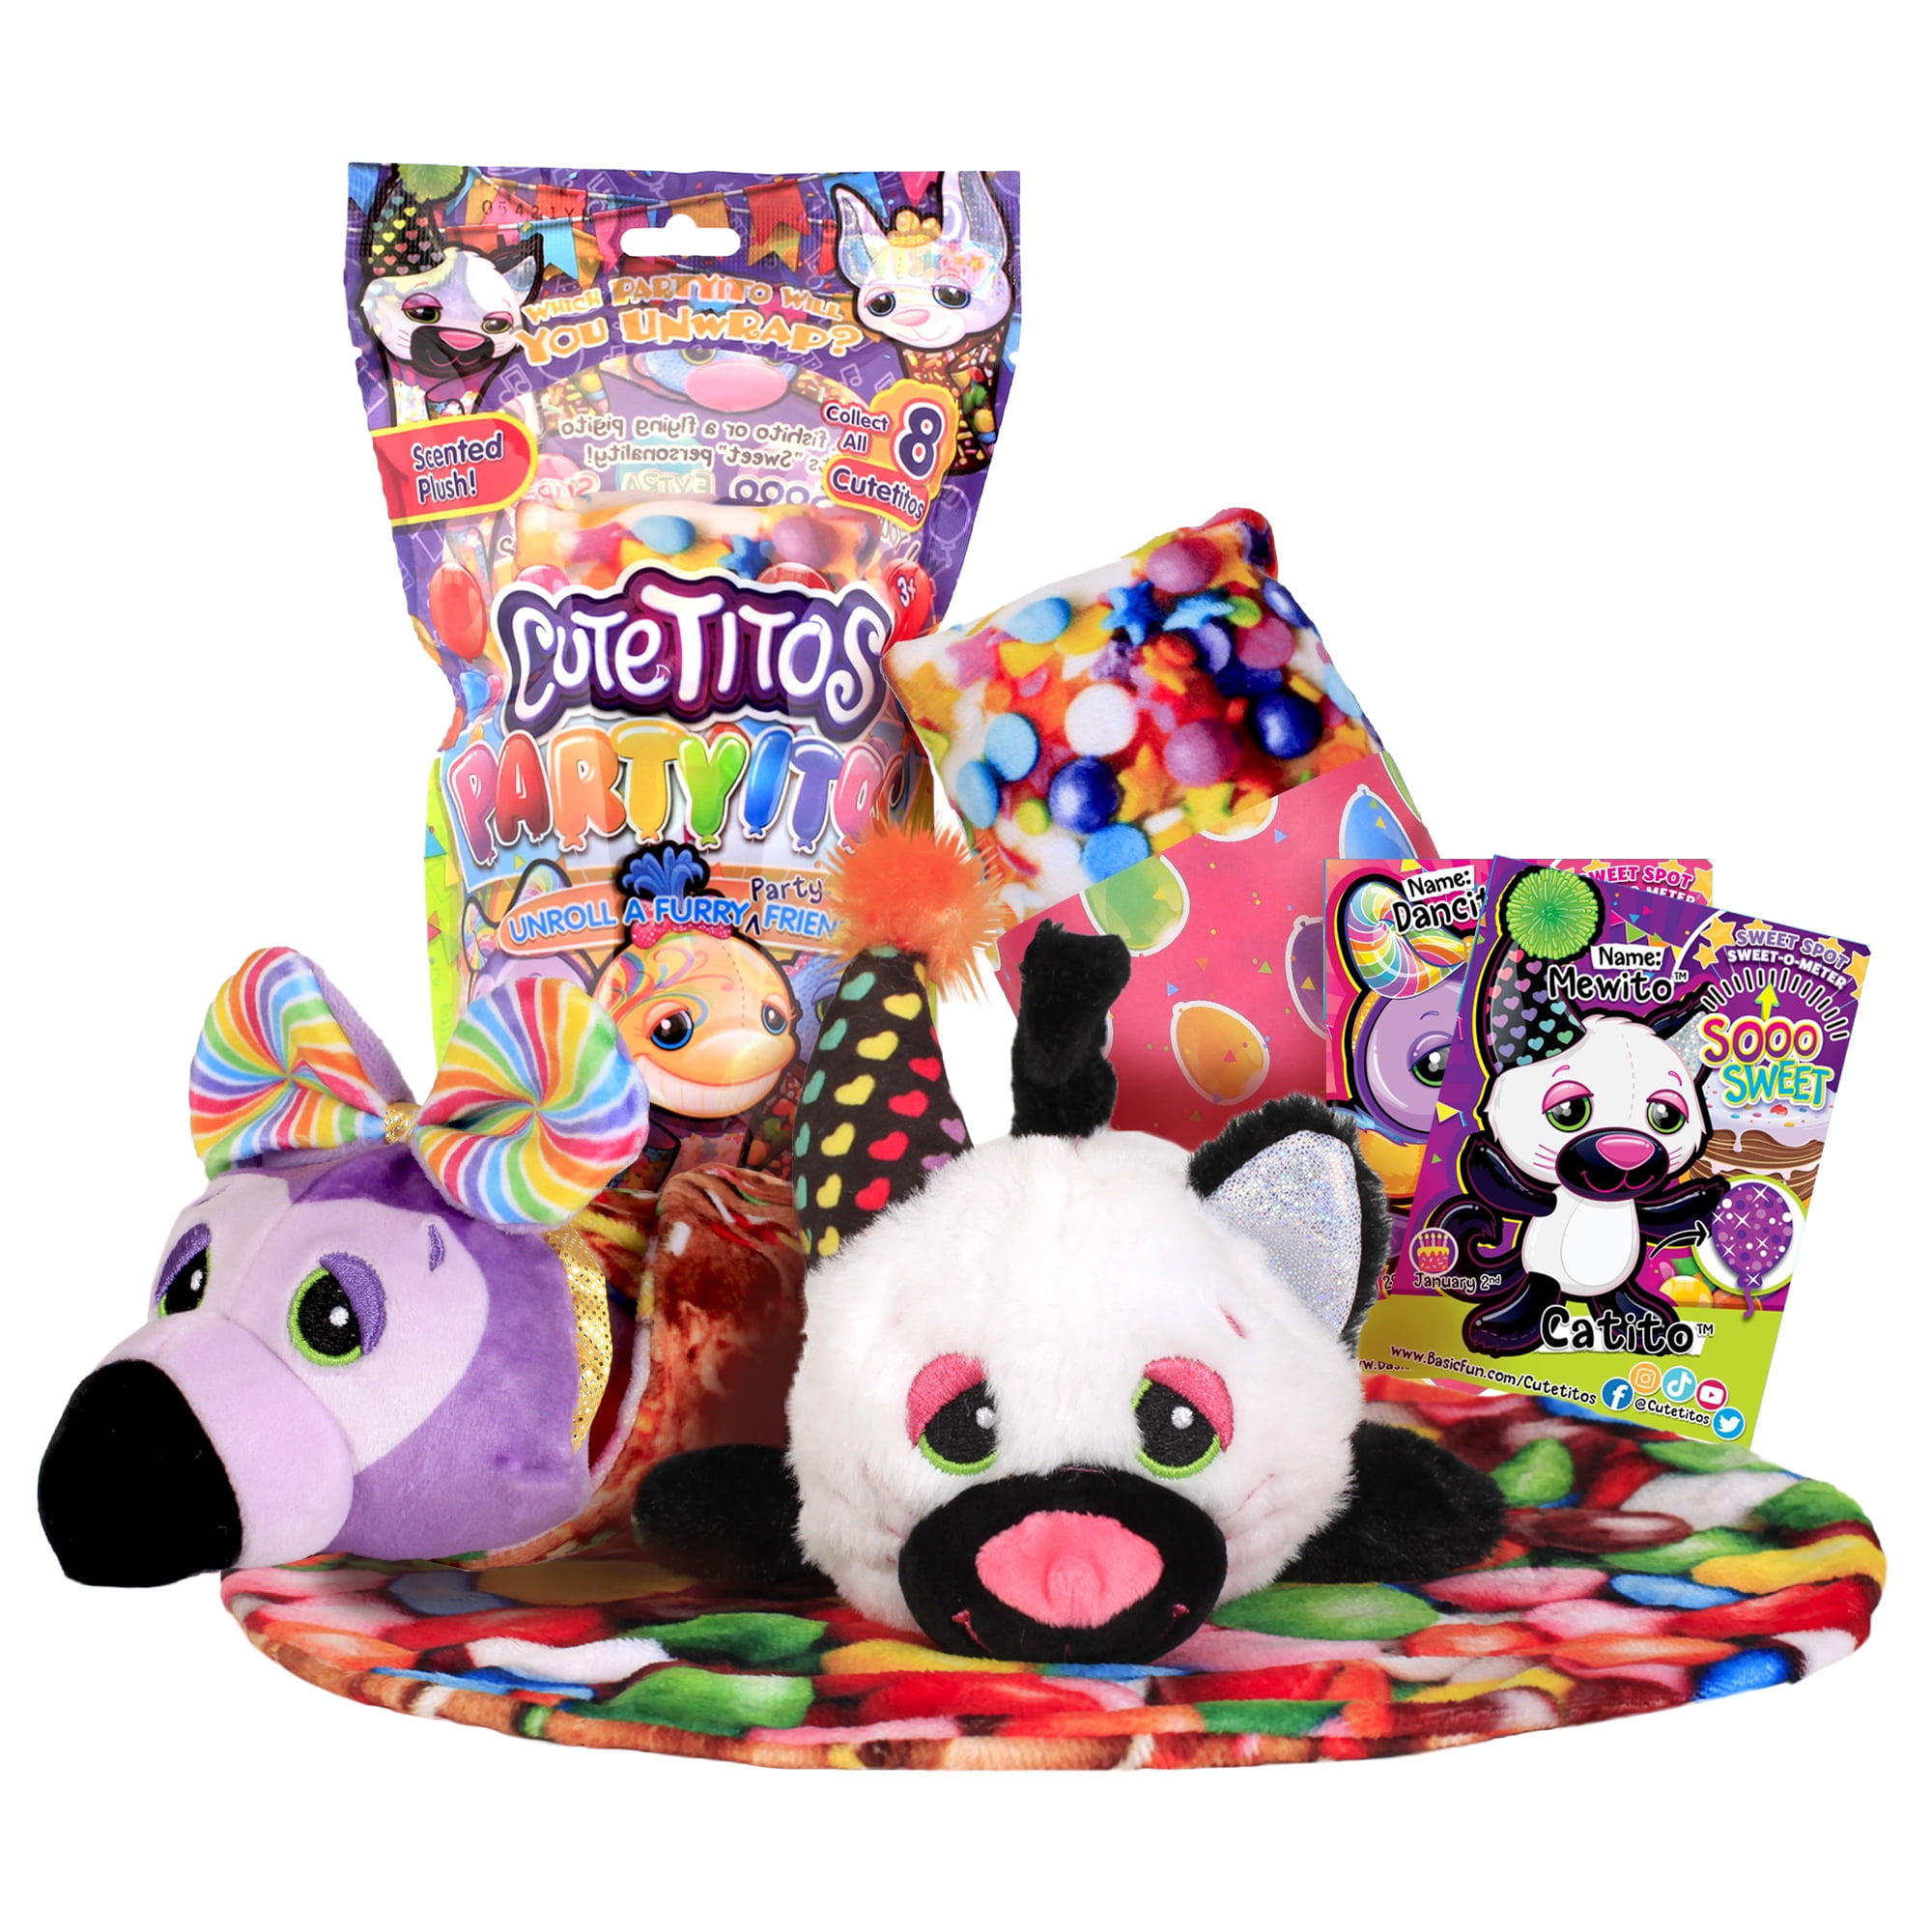 SCENTED Cutetitos Partyitos - Surprise Stuffed Animals - Collectible  Party-Themed Plush Animals 